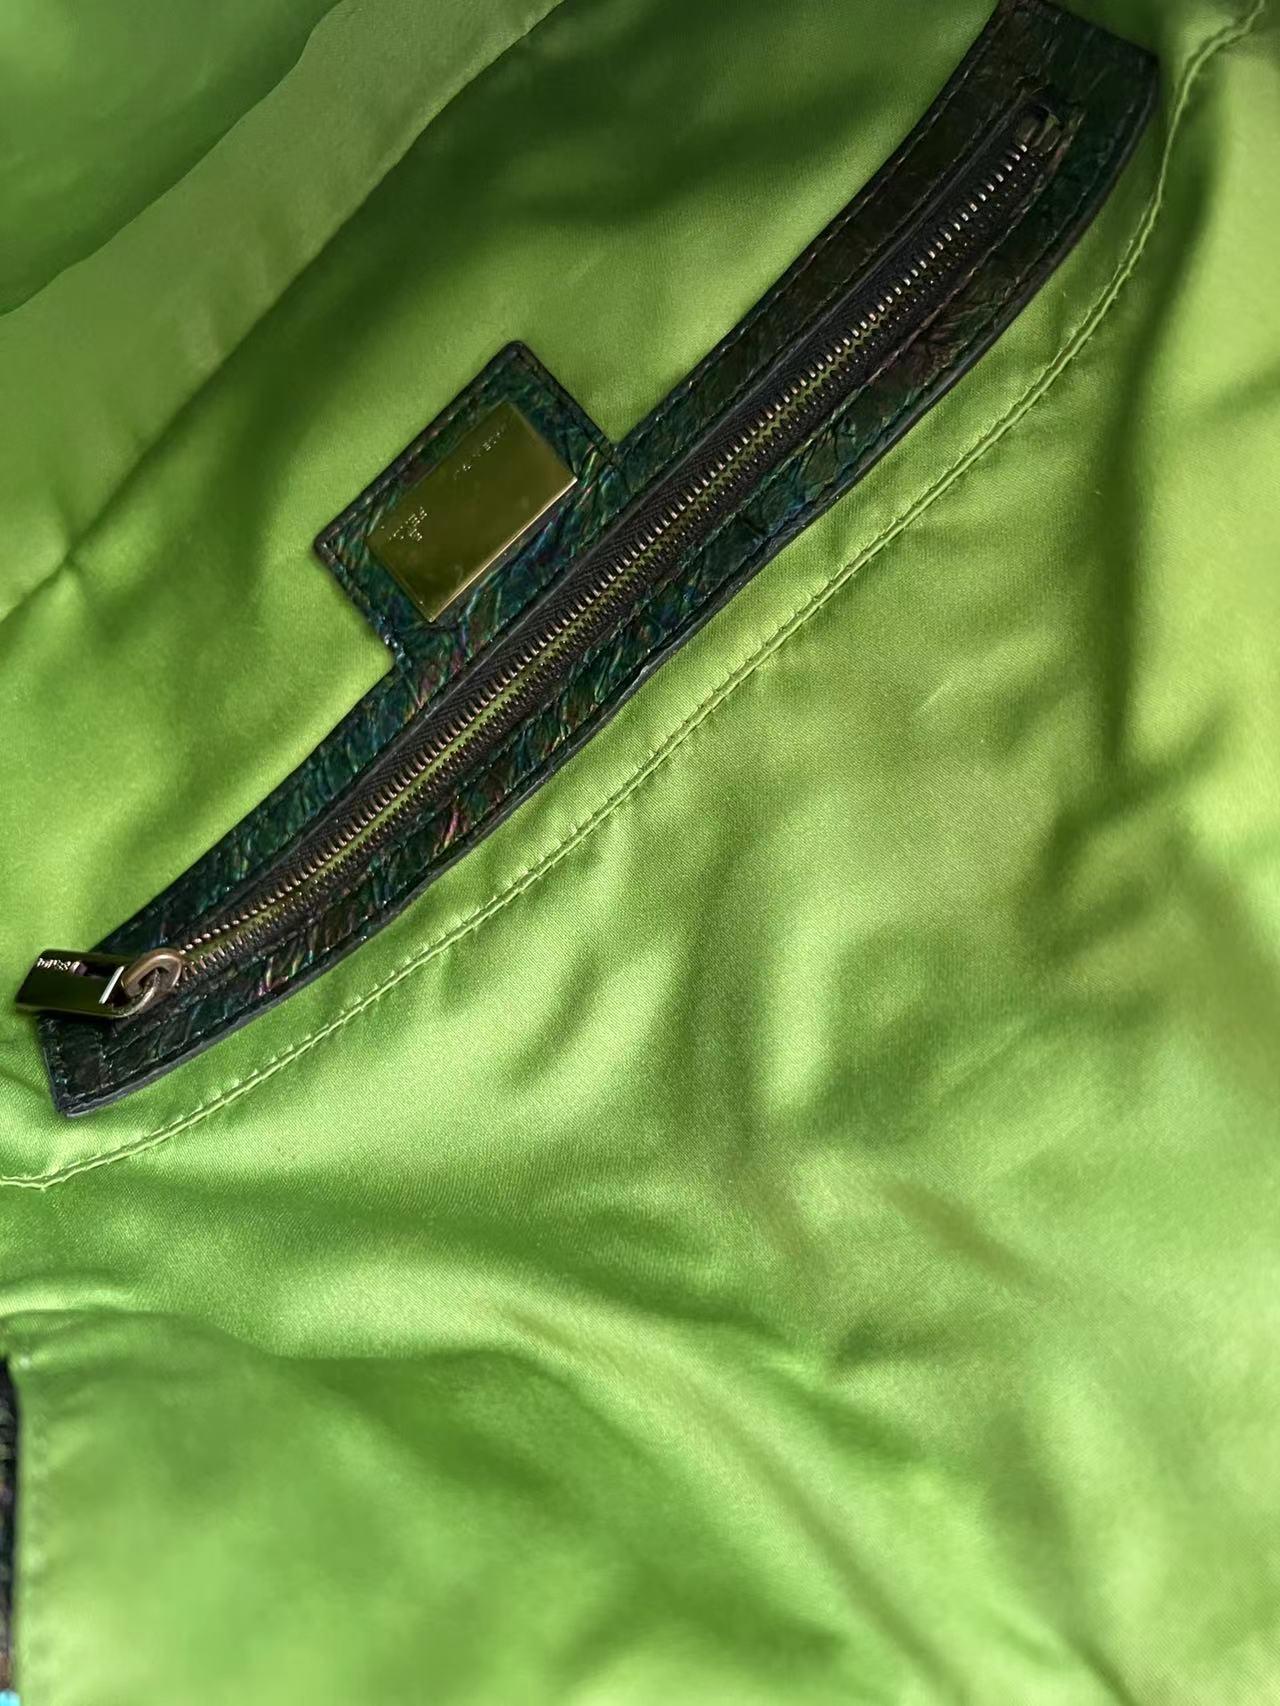 Vintage Fendi Peacock Embroidery Baguette In Excellent Condition For Sale In Aurora, IL